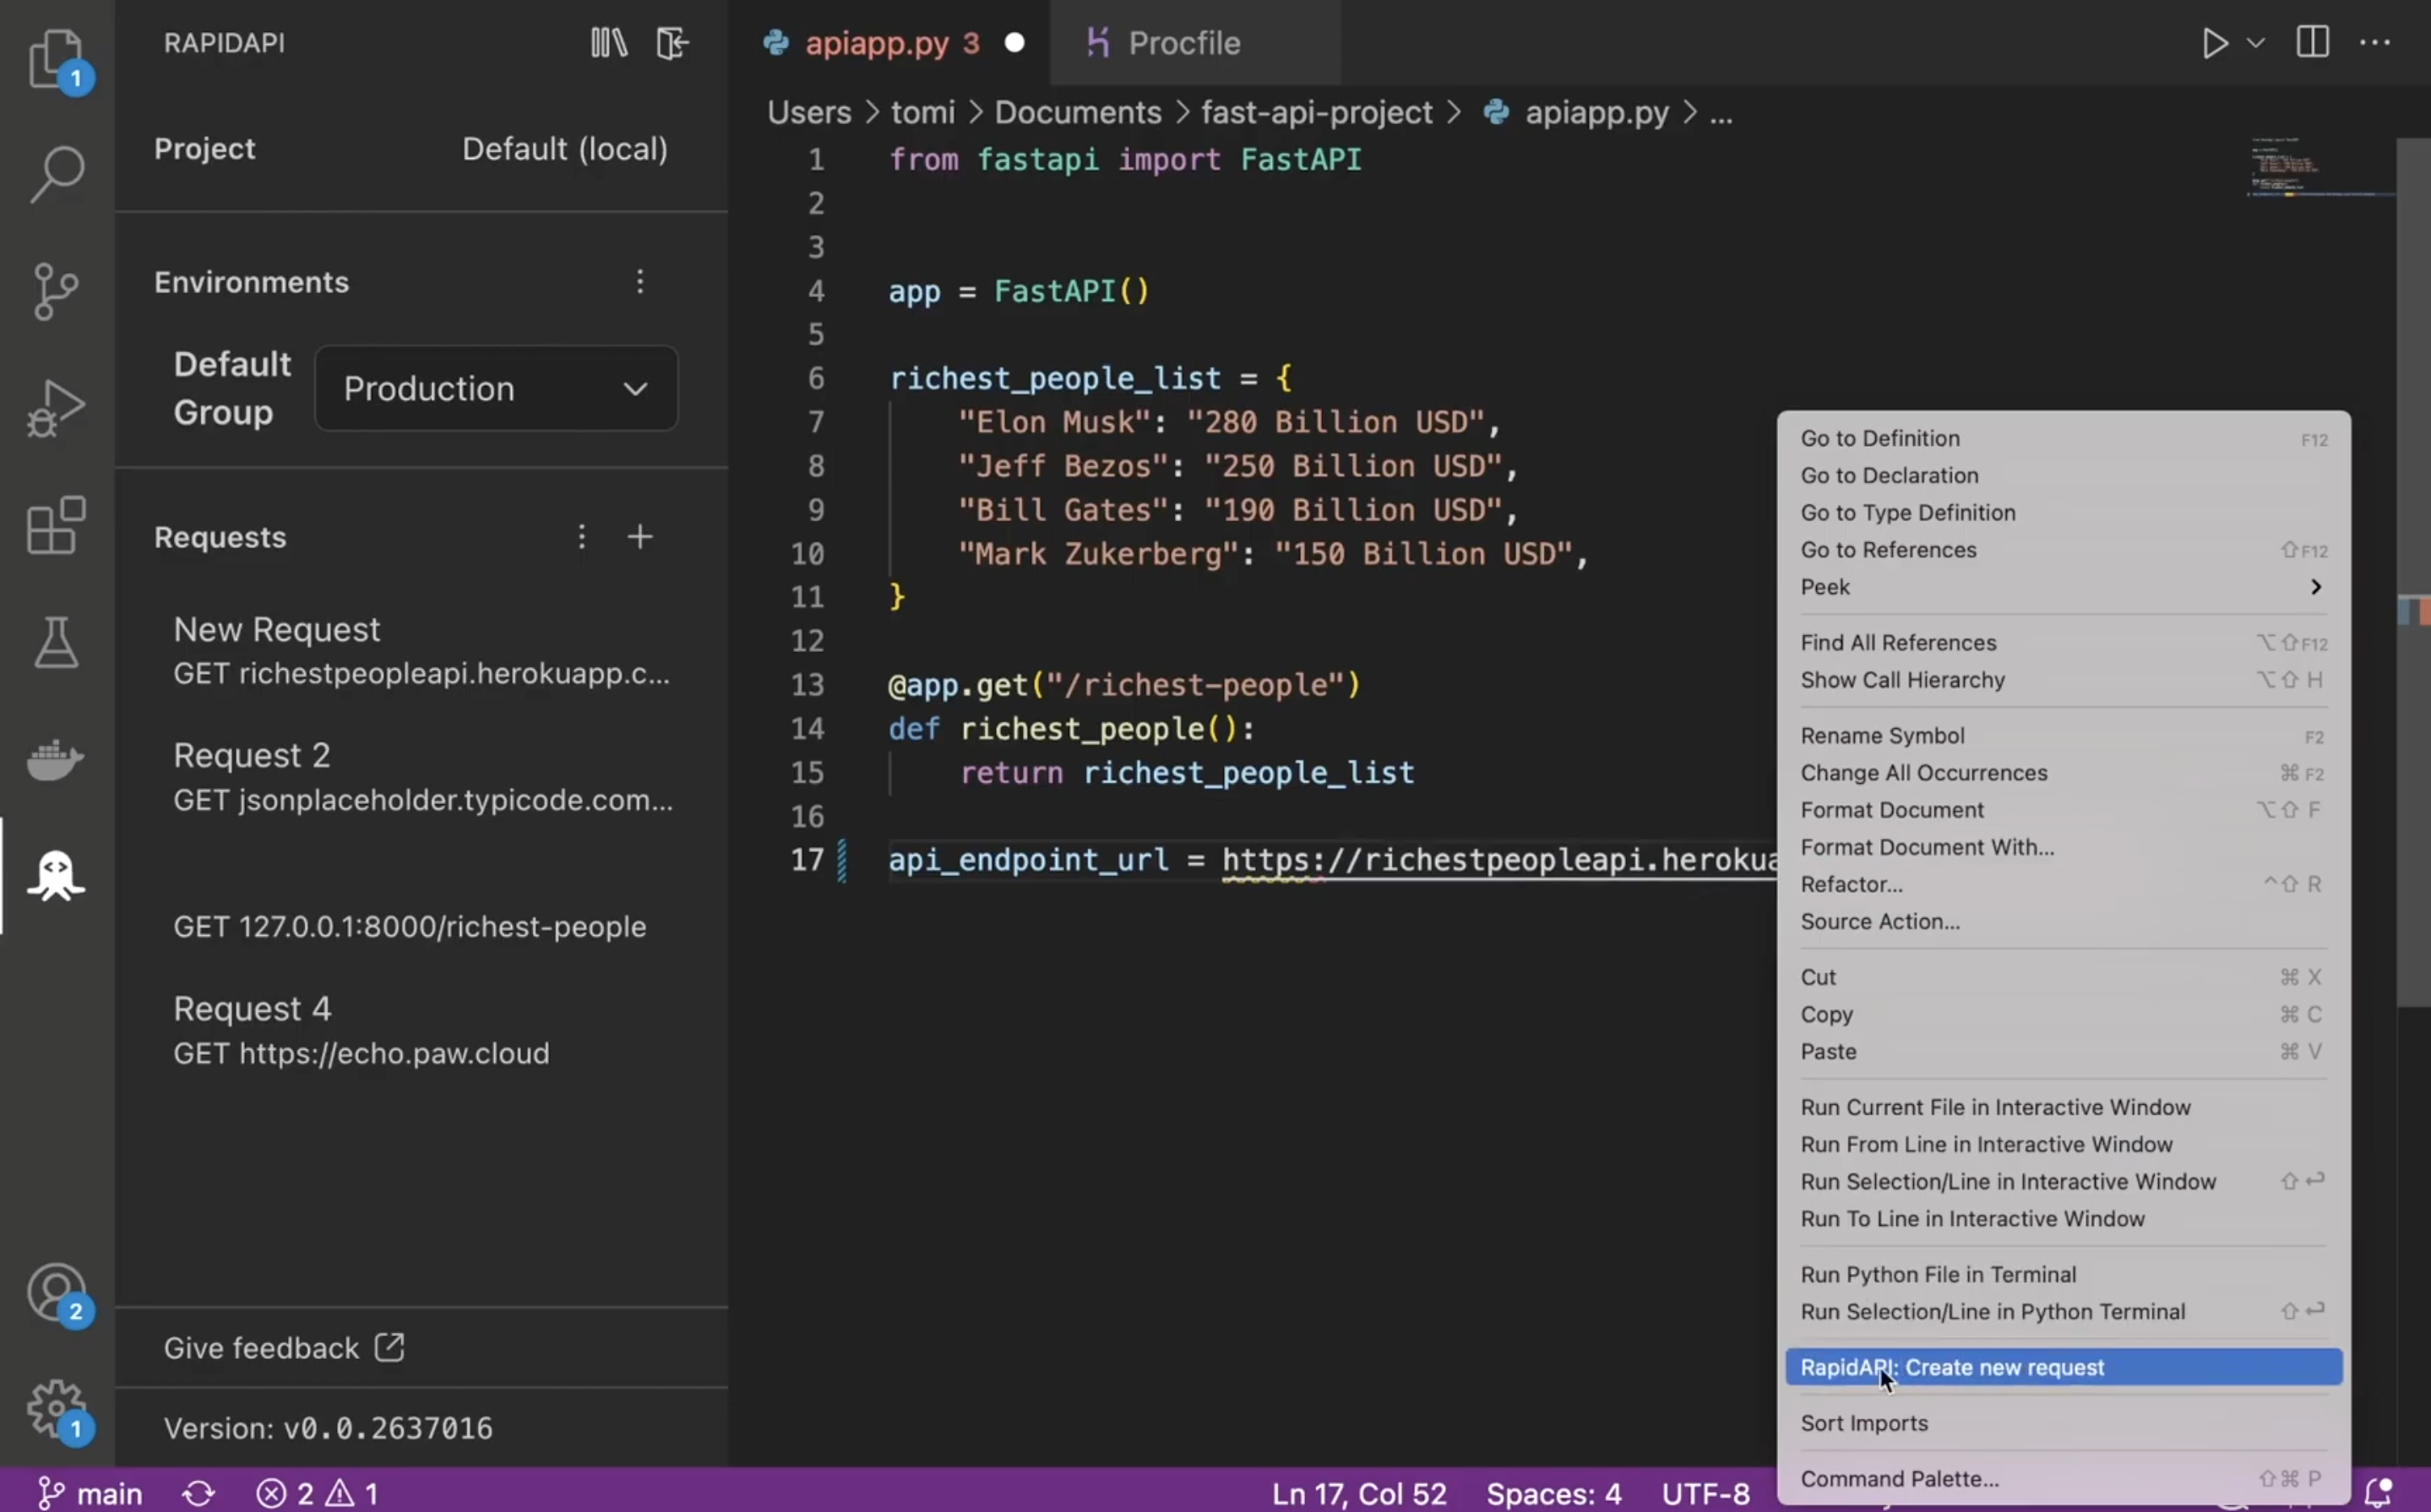 Using RapidAPI to create new request on VS Code